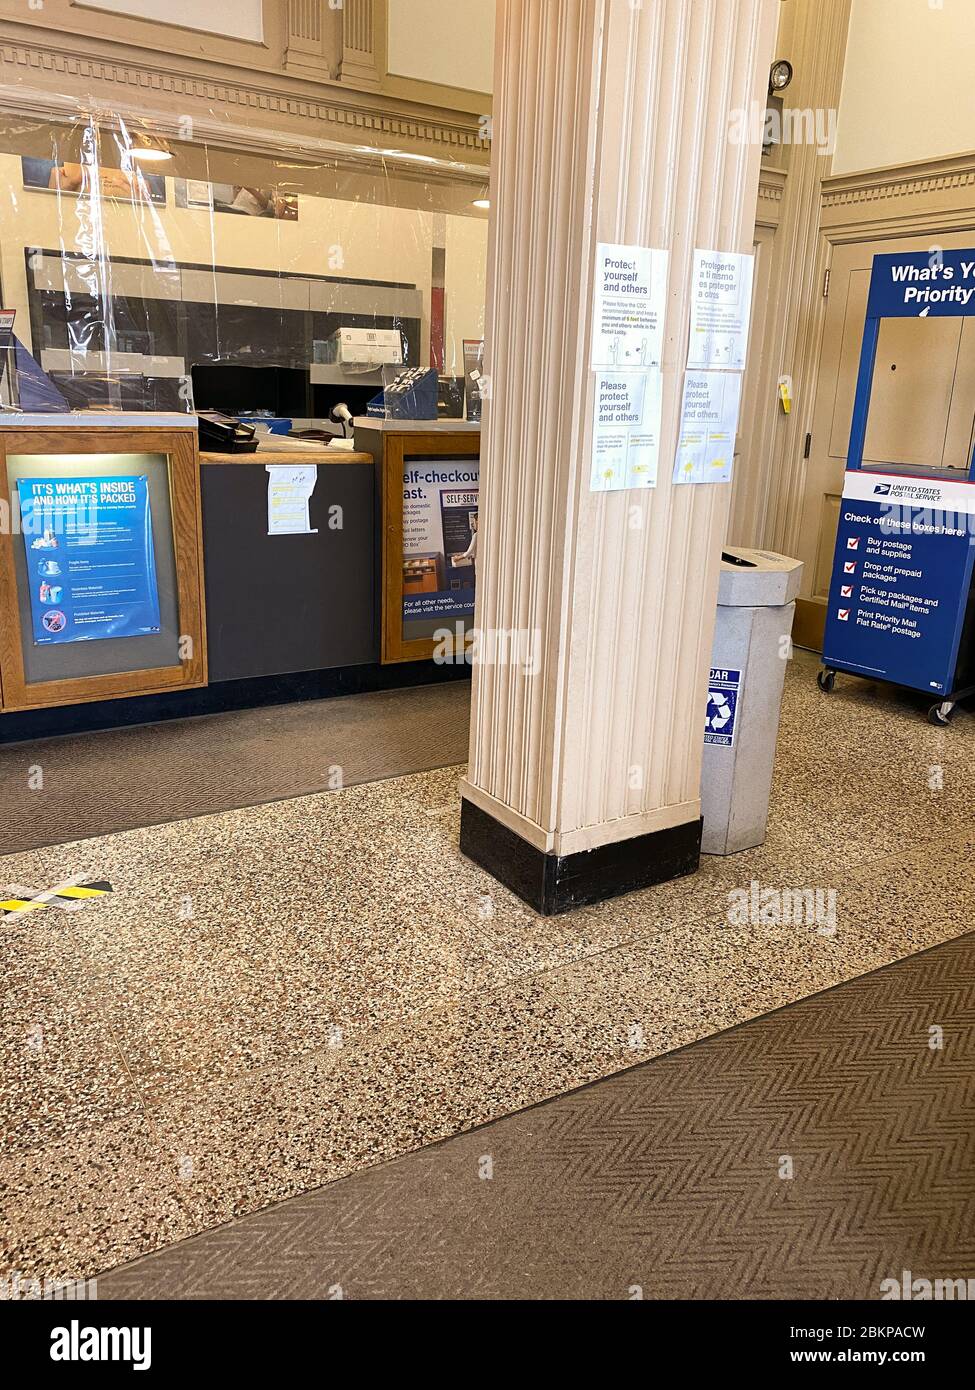 Protective measures inside the post office in Wilmette, IL (suburb of Chicago). Plastic sheeting and distance markers are visible. Stock Photo